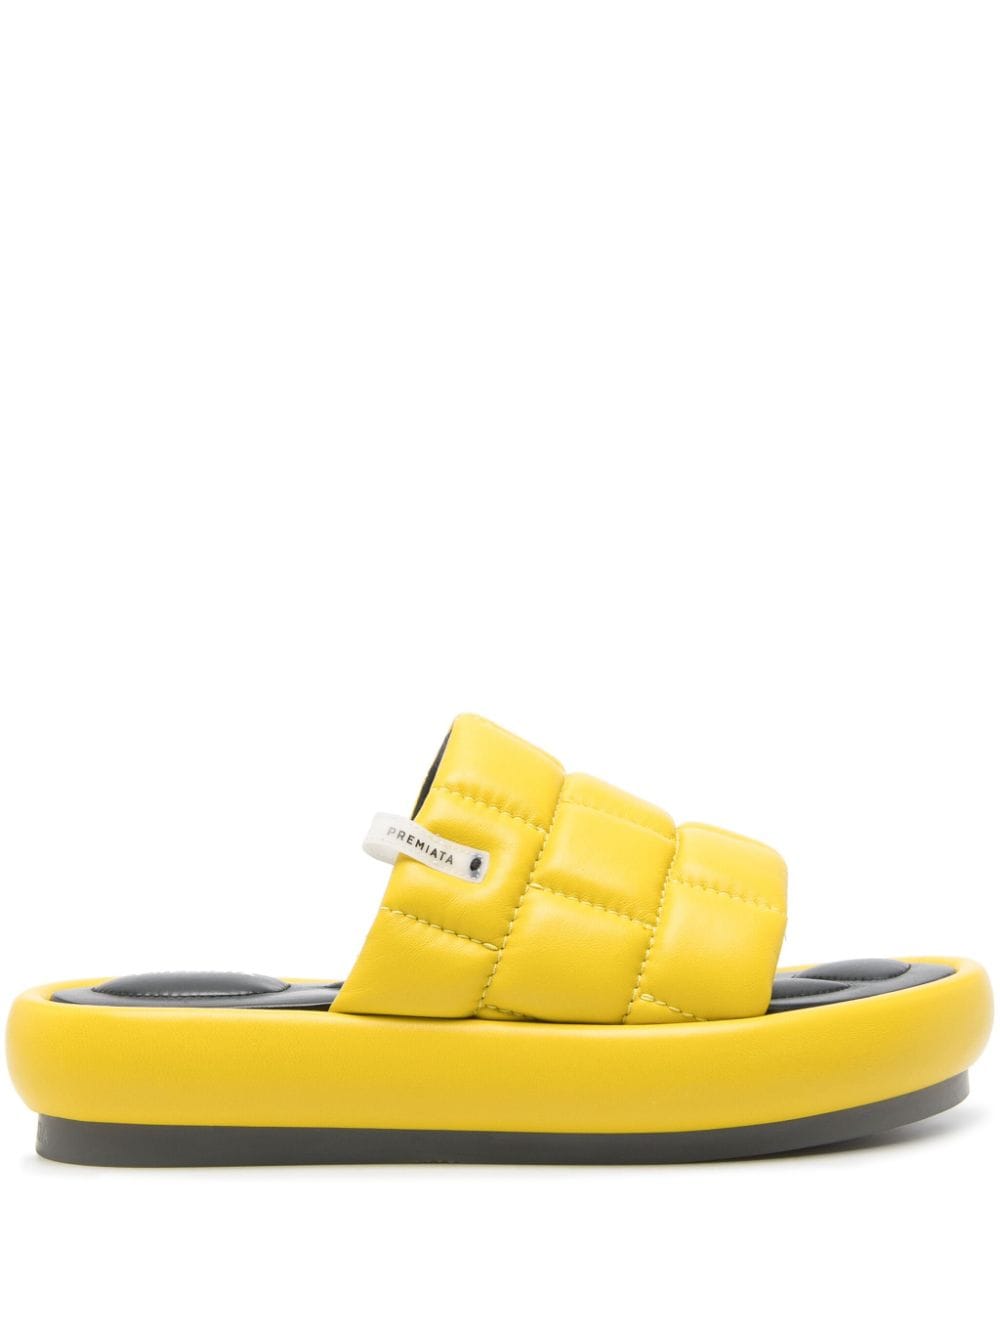 Premiata Quilted Leather Slides In Yellow